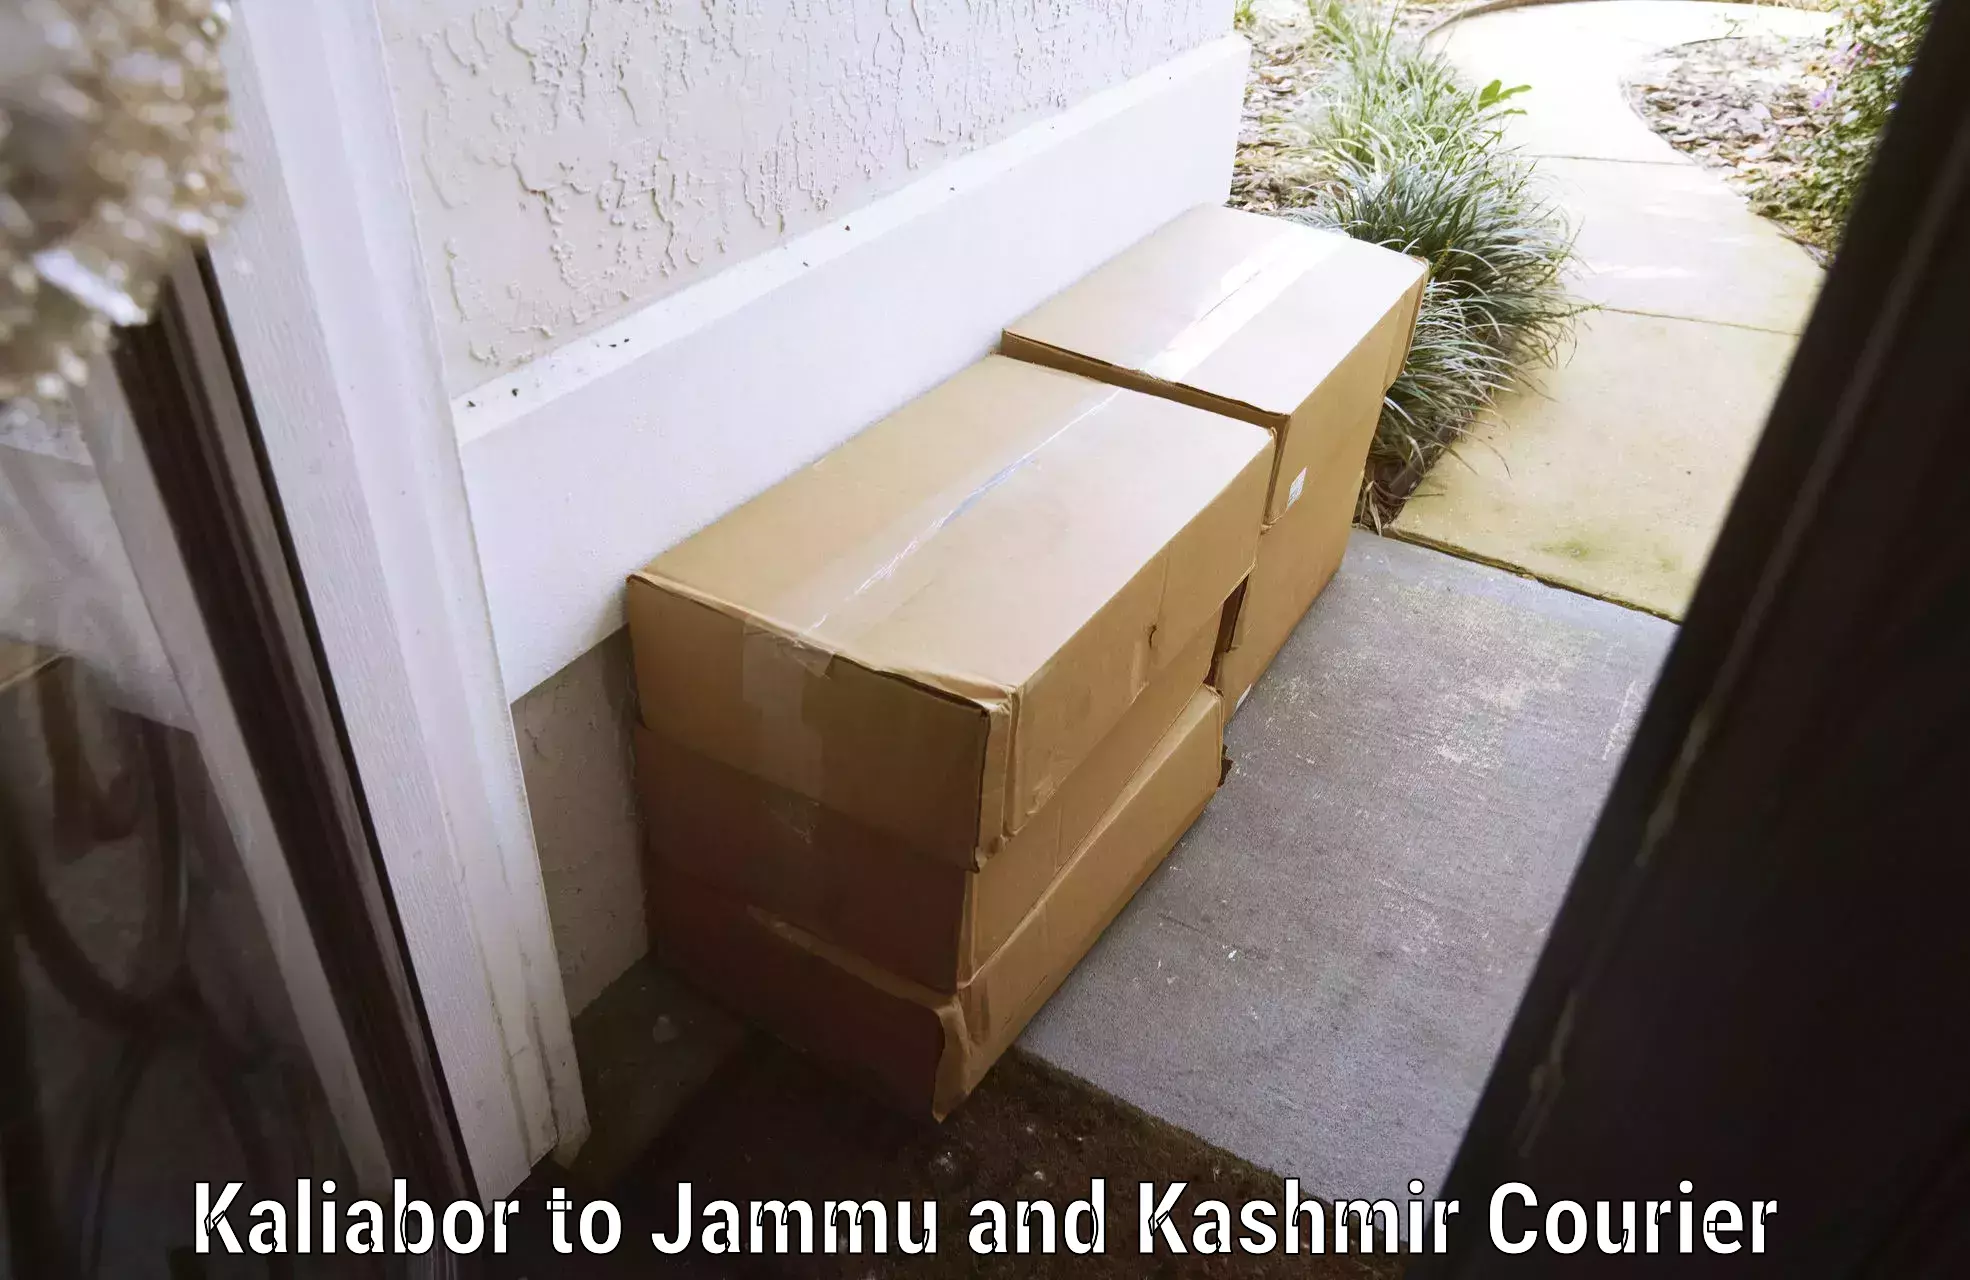 Luggage delivery news Kaliabor to Jammu and Kashmir